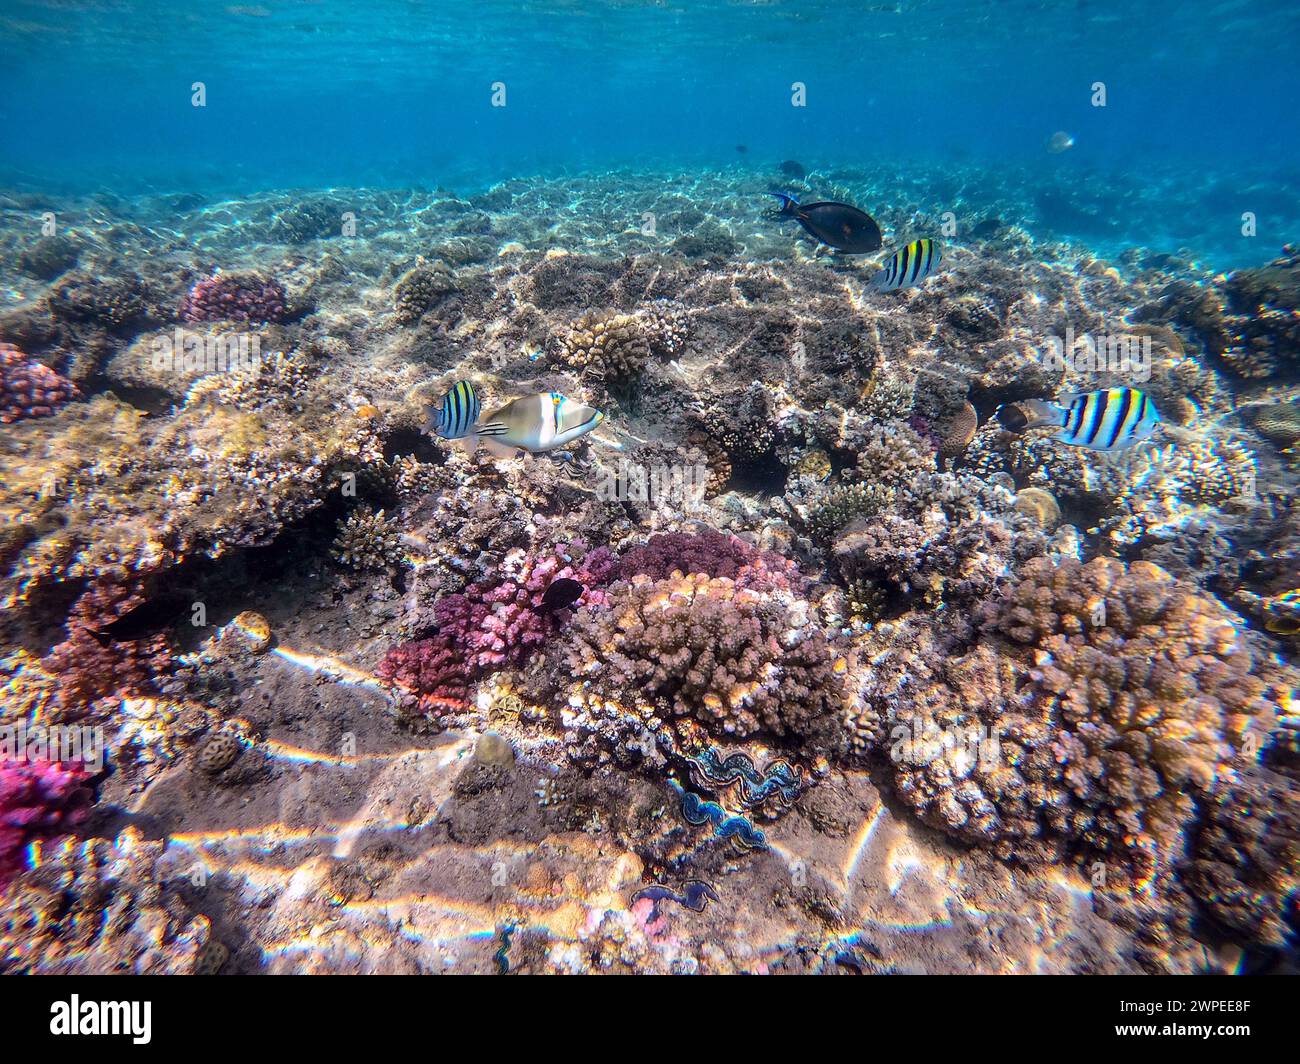 Colorful tropical Rhinecanthus assasi fish or Picasso trigger fish underwater at the coral reef. Underwater life of reef with corals and tropical fish Stock Photo